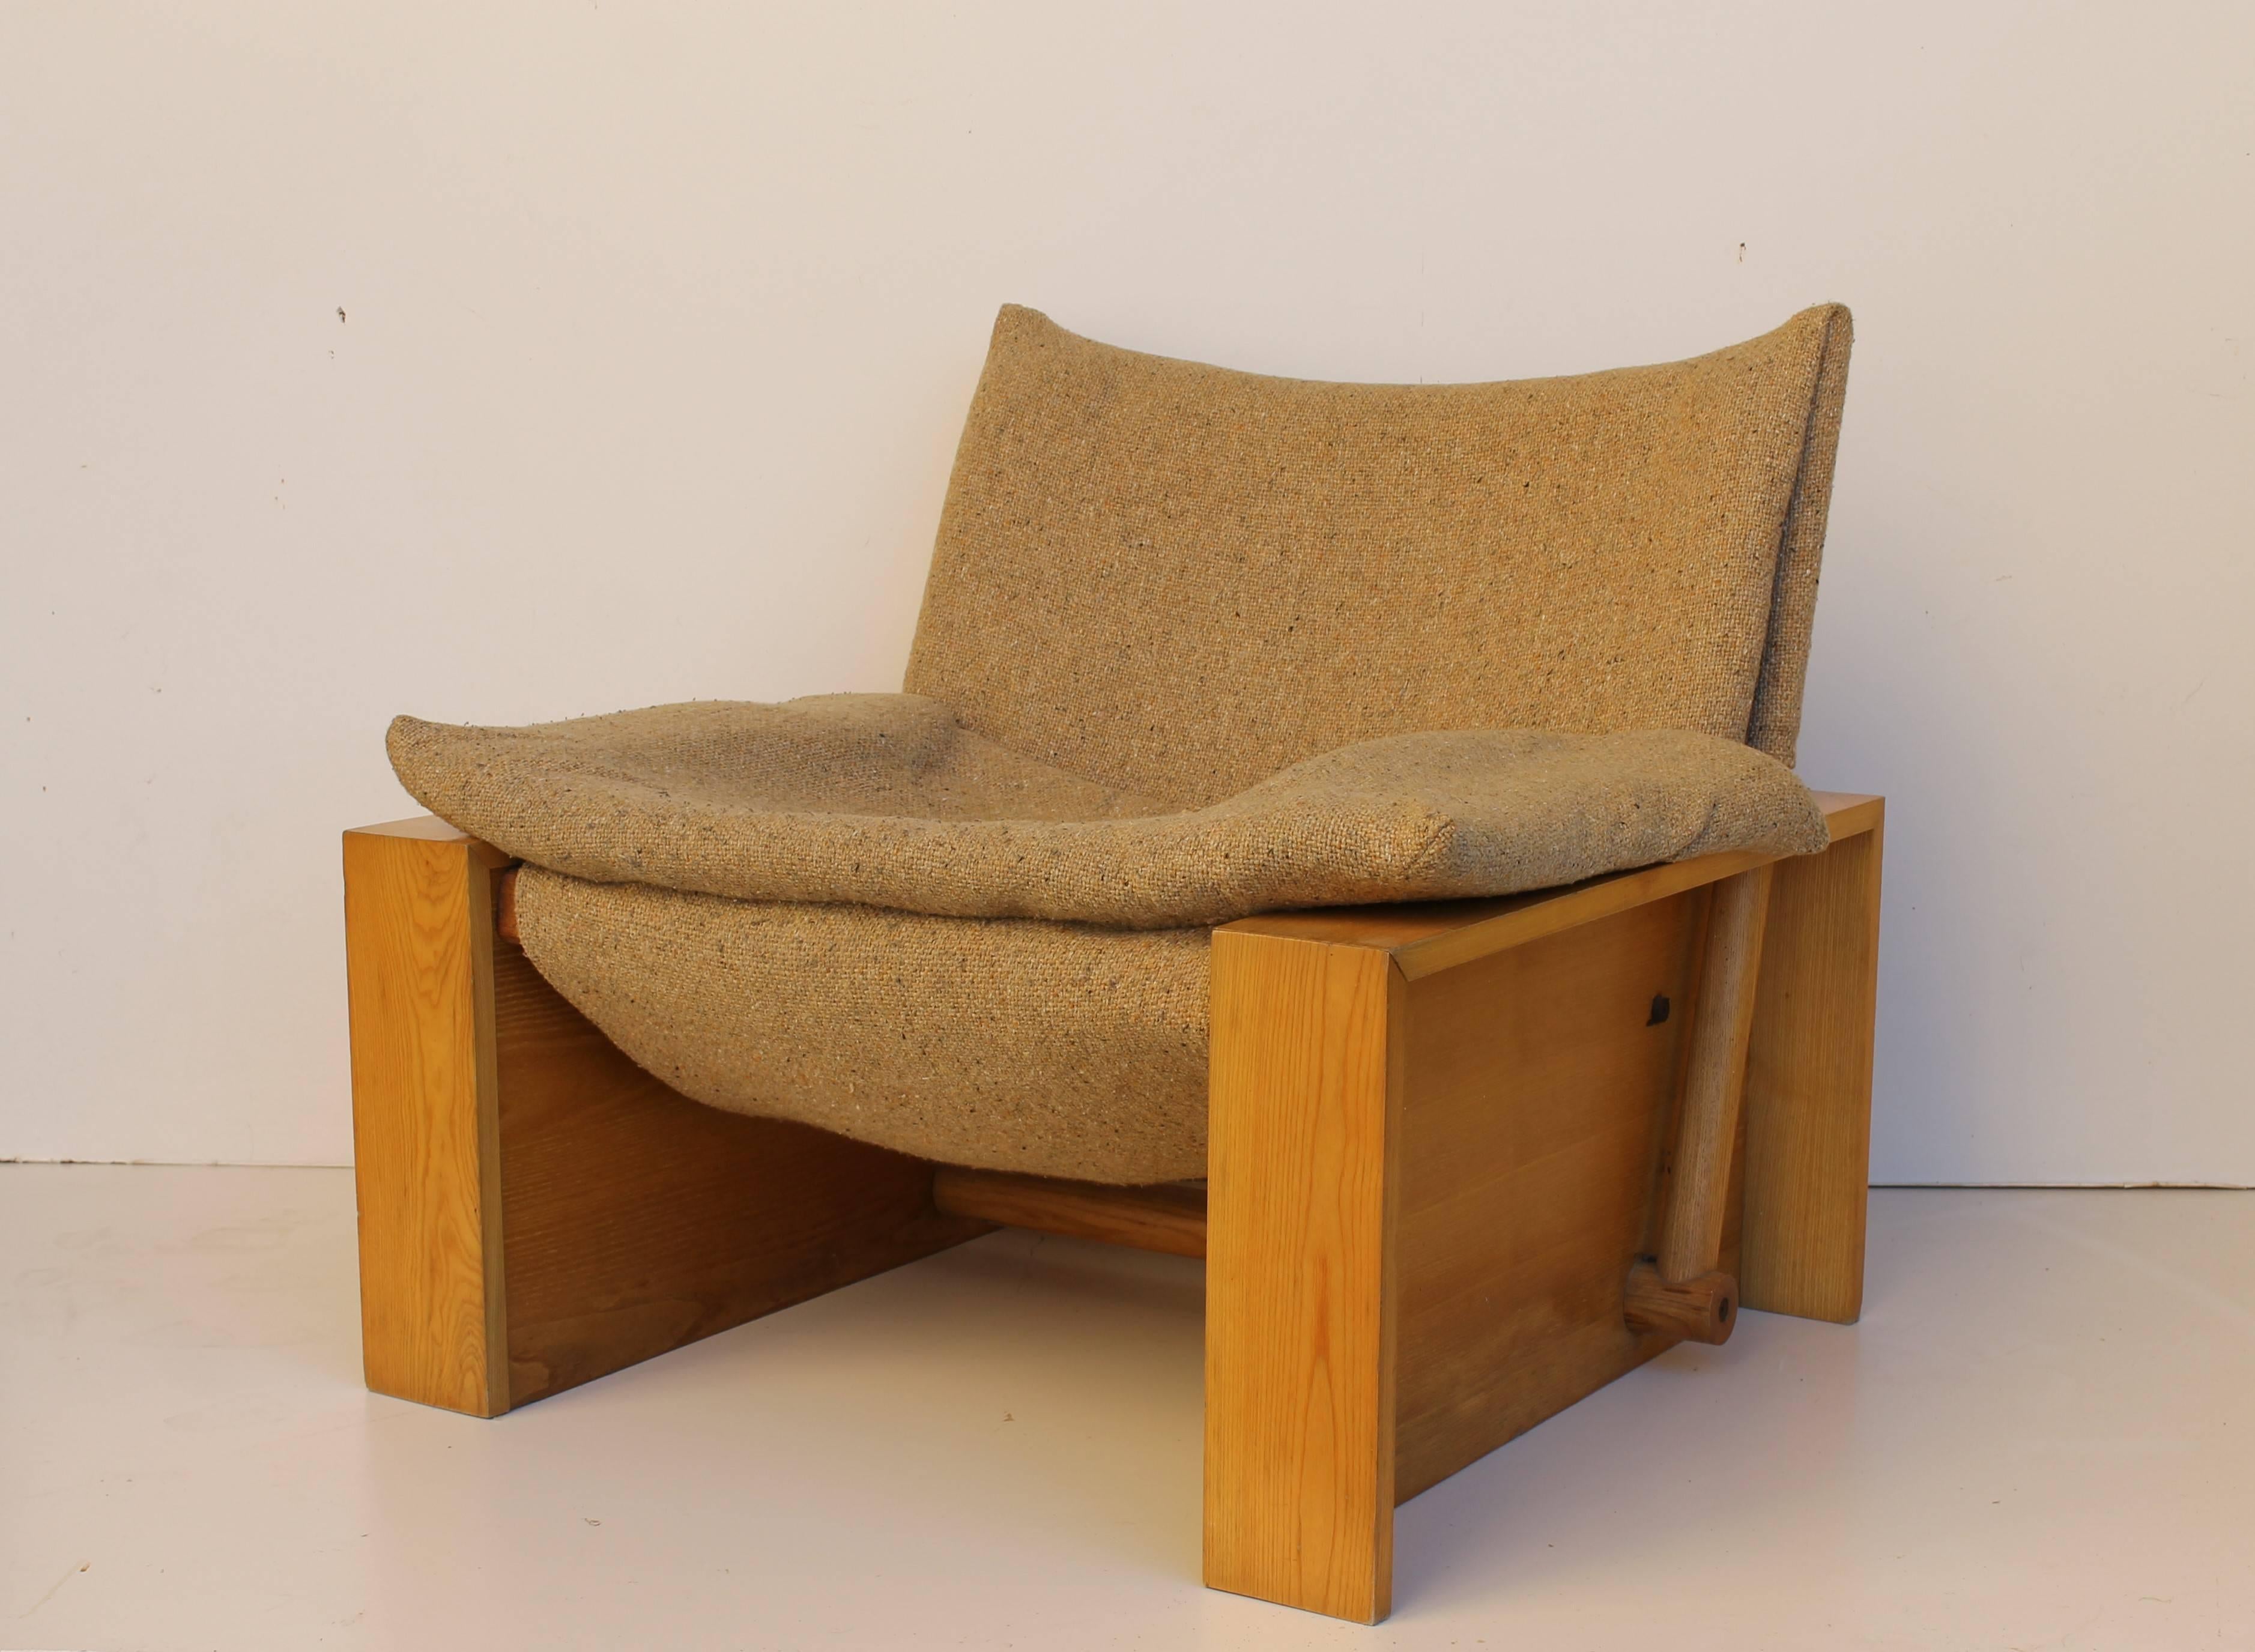 Two square lounge chairs, Italian design, dated circa 1978

Massive ash structure, camel-colored bouclé upholstery (completely removable).